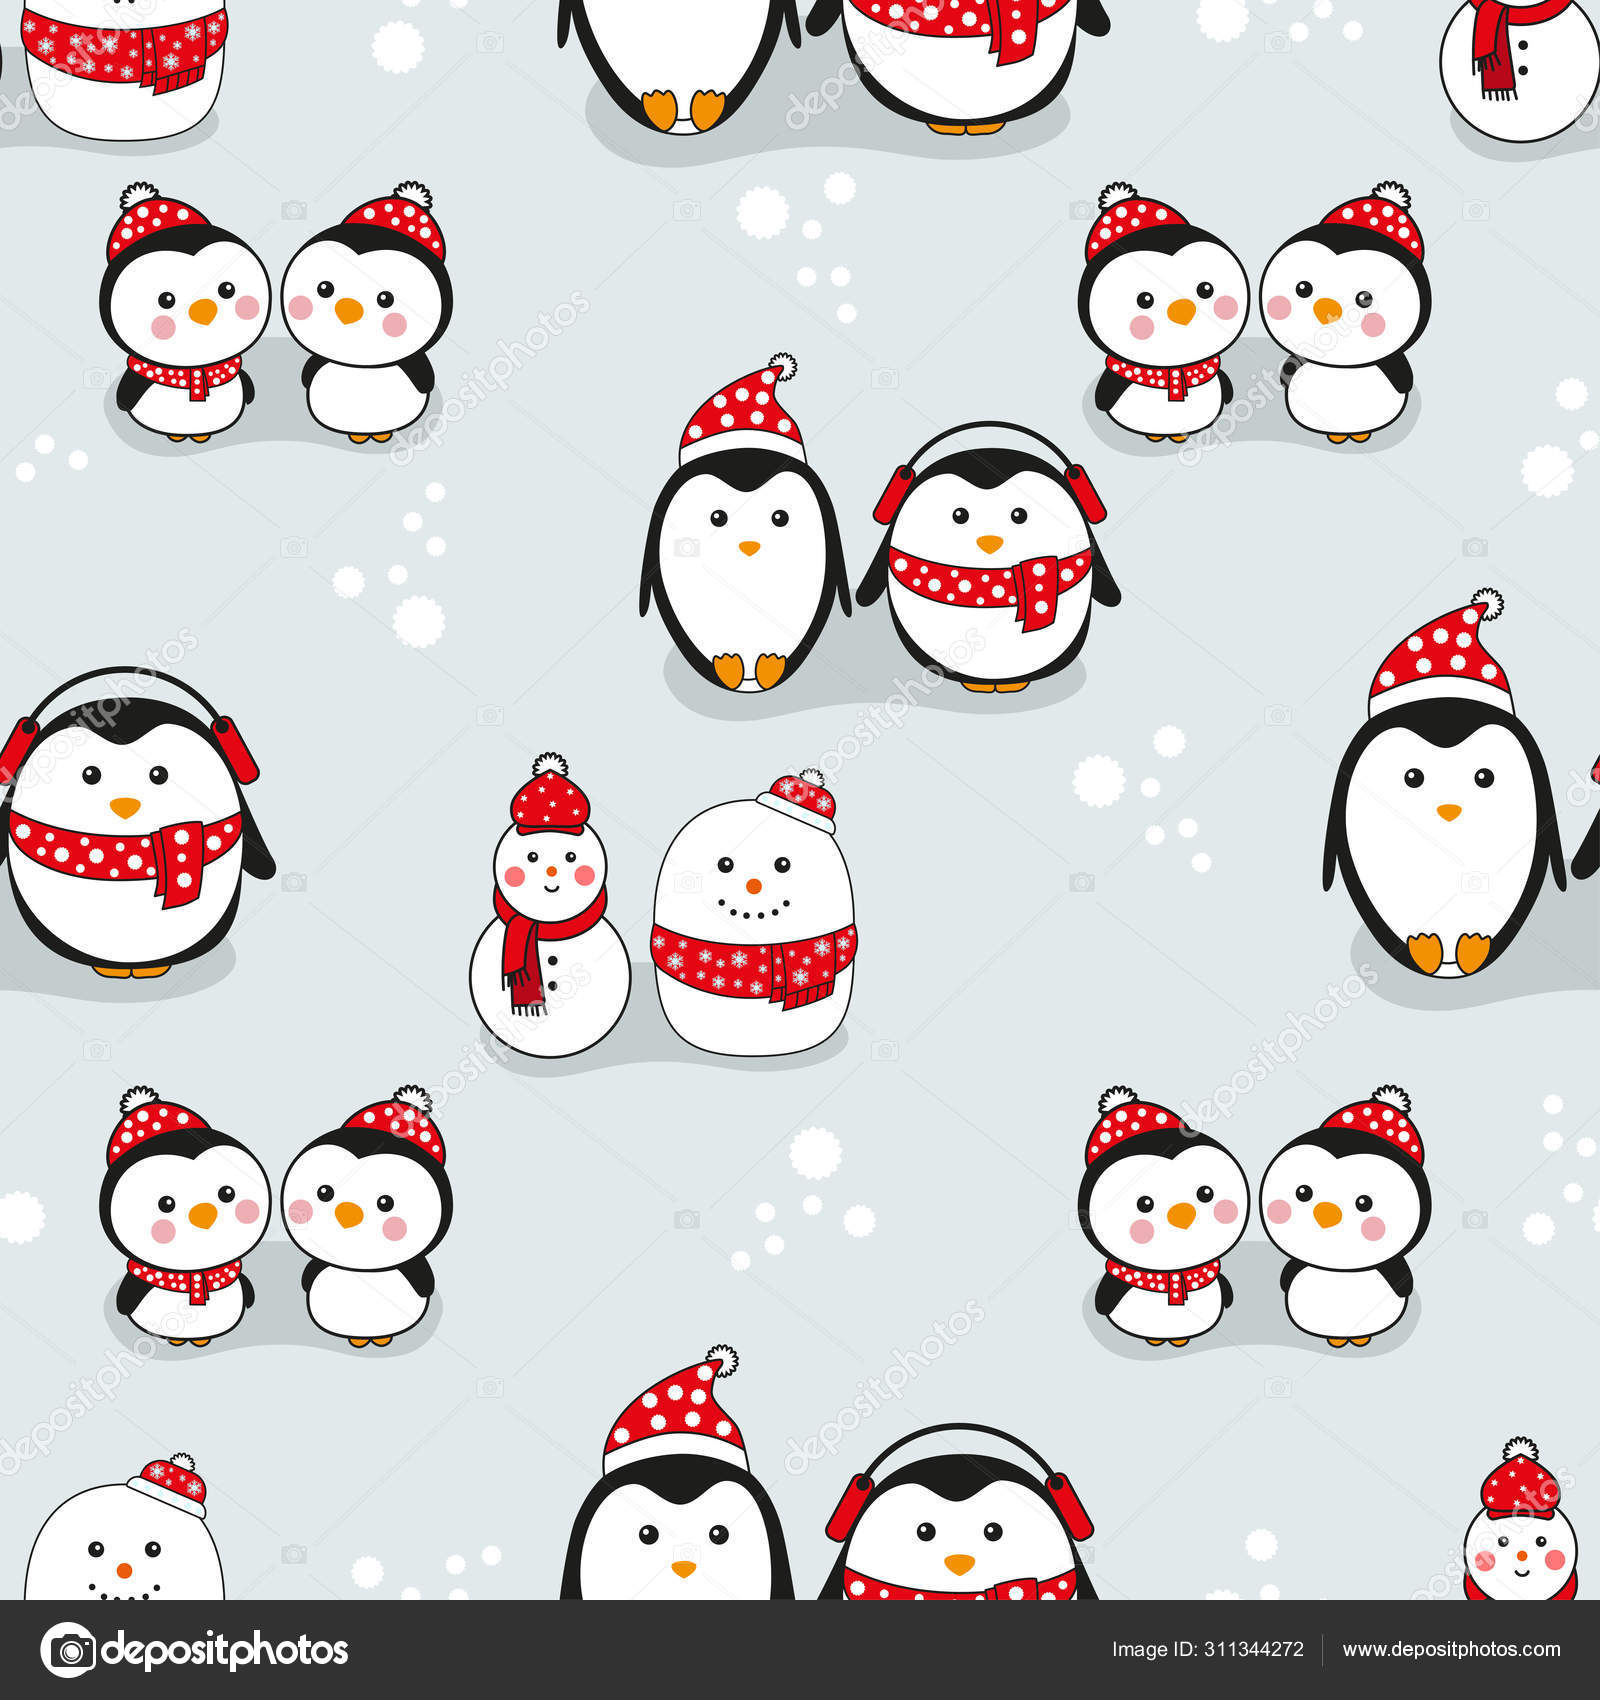 Christmas Pattern Cute Kawaii Penguins Snowman Snow Light Grey Background Stock Vector Image By C Zv 311344272